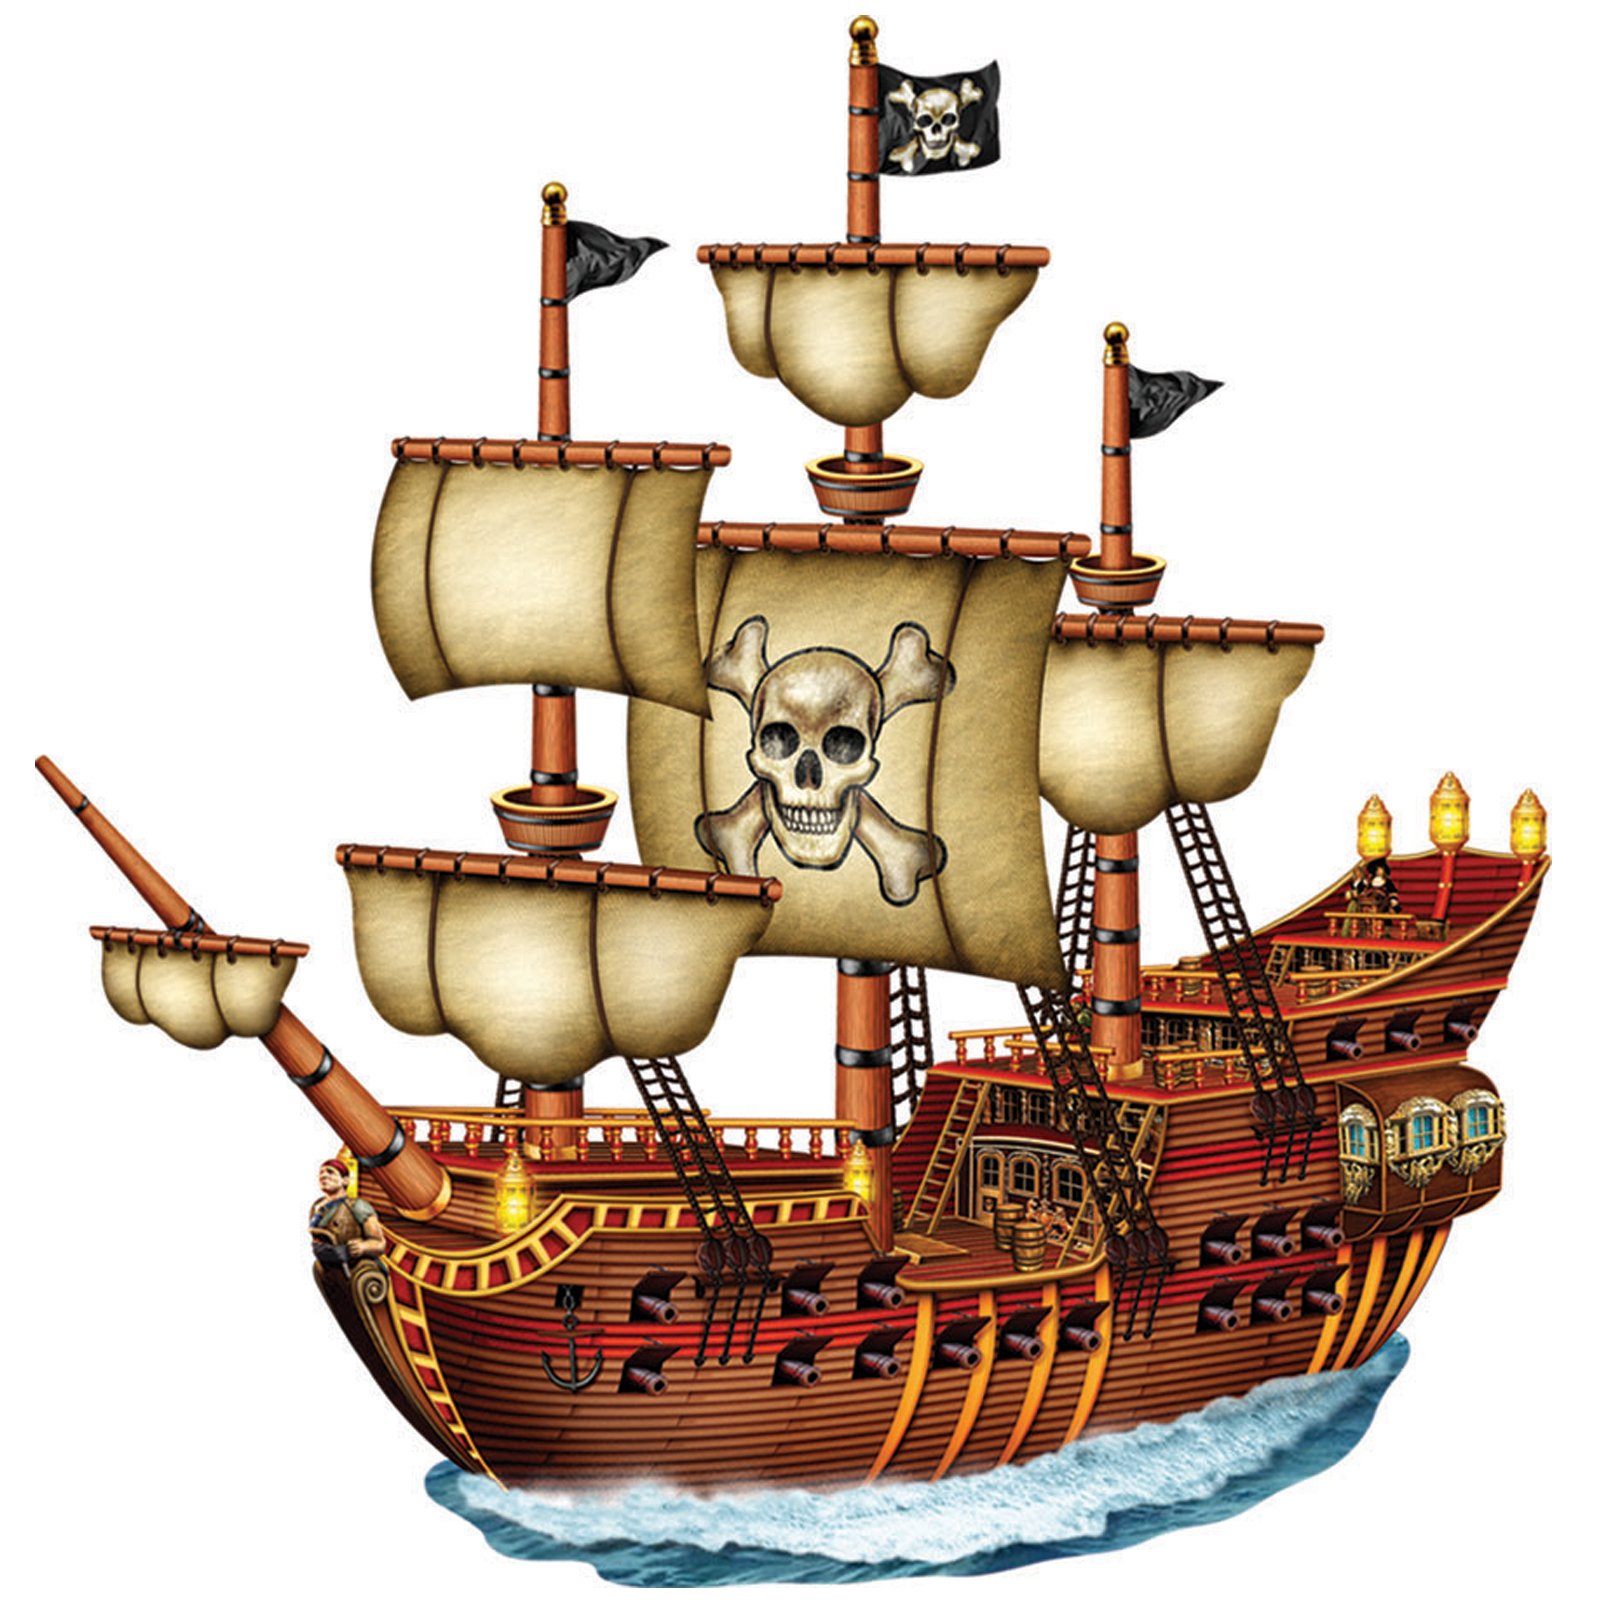 14 Cartoon Pirate Ship Free Cliparts That You Can Download To You